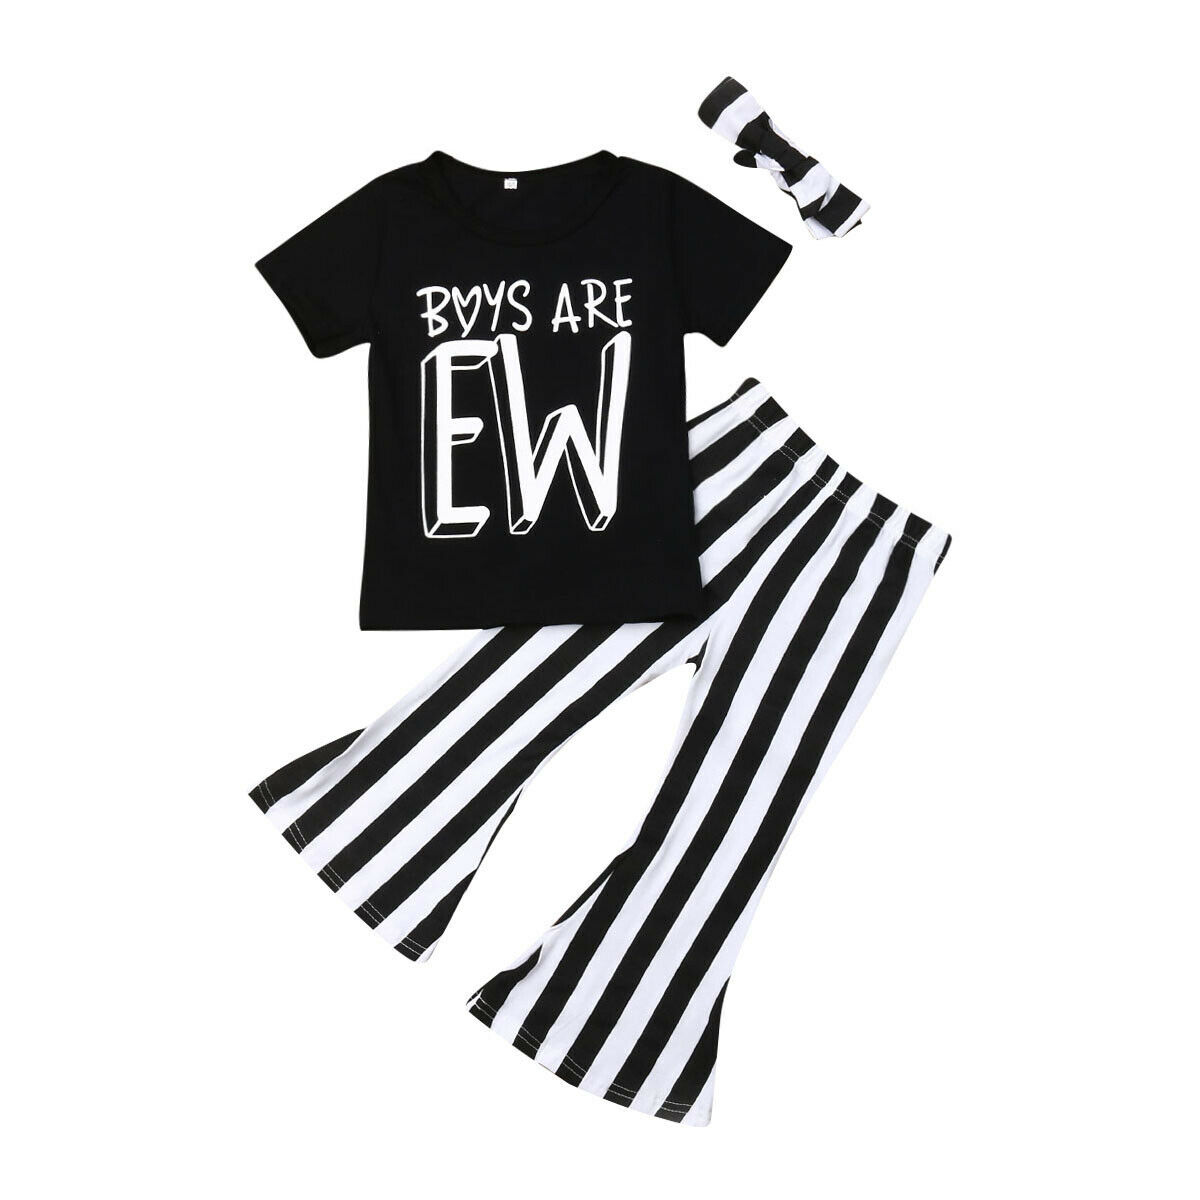 3Pcs Infant Baby Girls Outfits Letters Printed Short Sleeve T-Shirt Top + Striped Flare Pants Long Trousers + Cute Headband